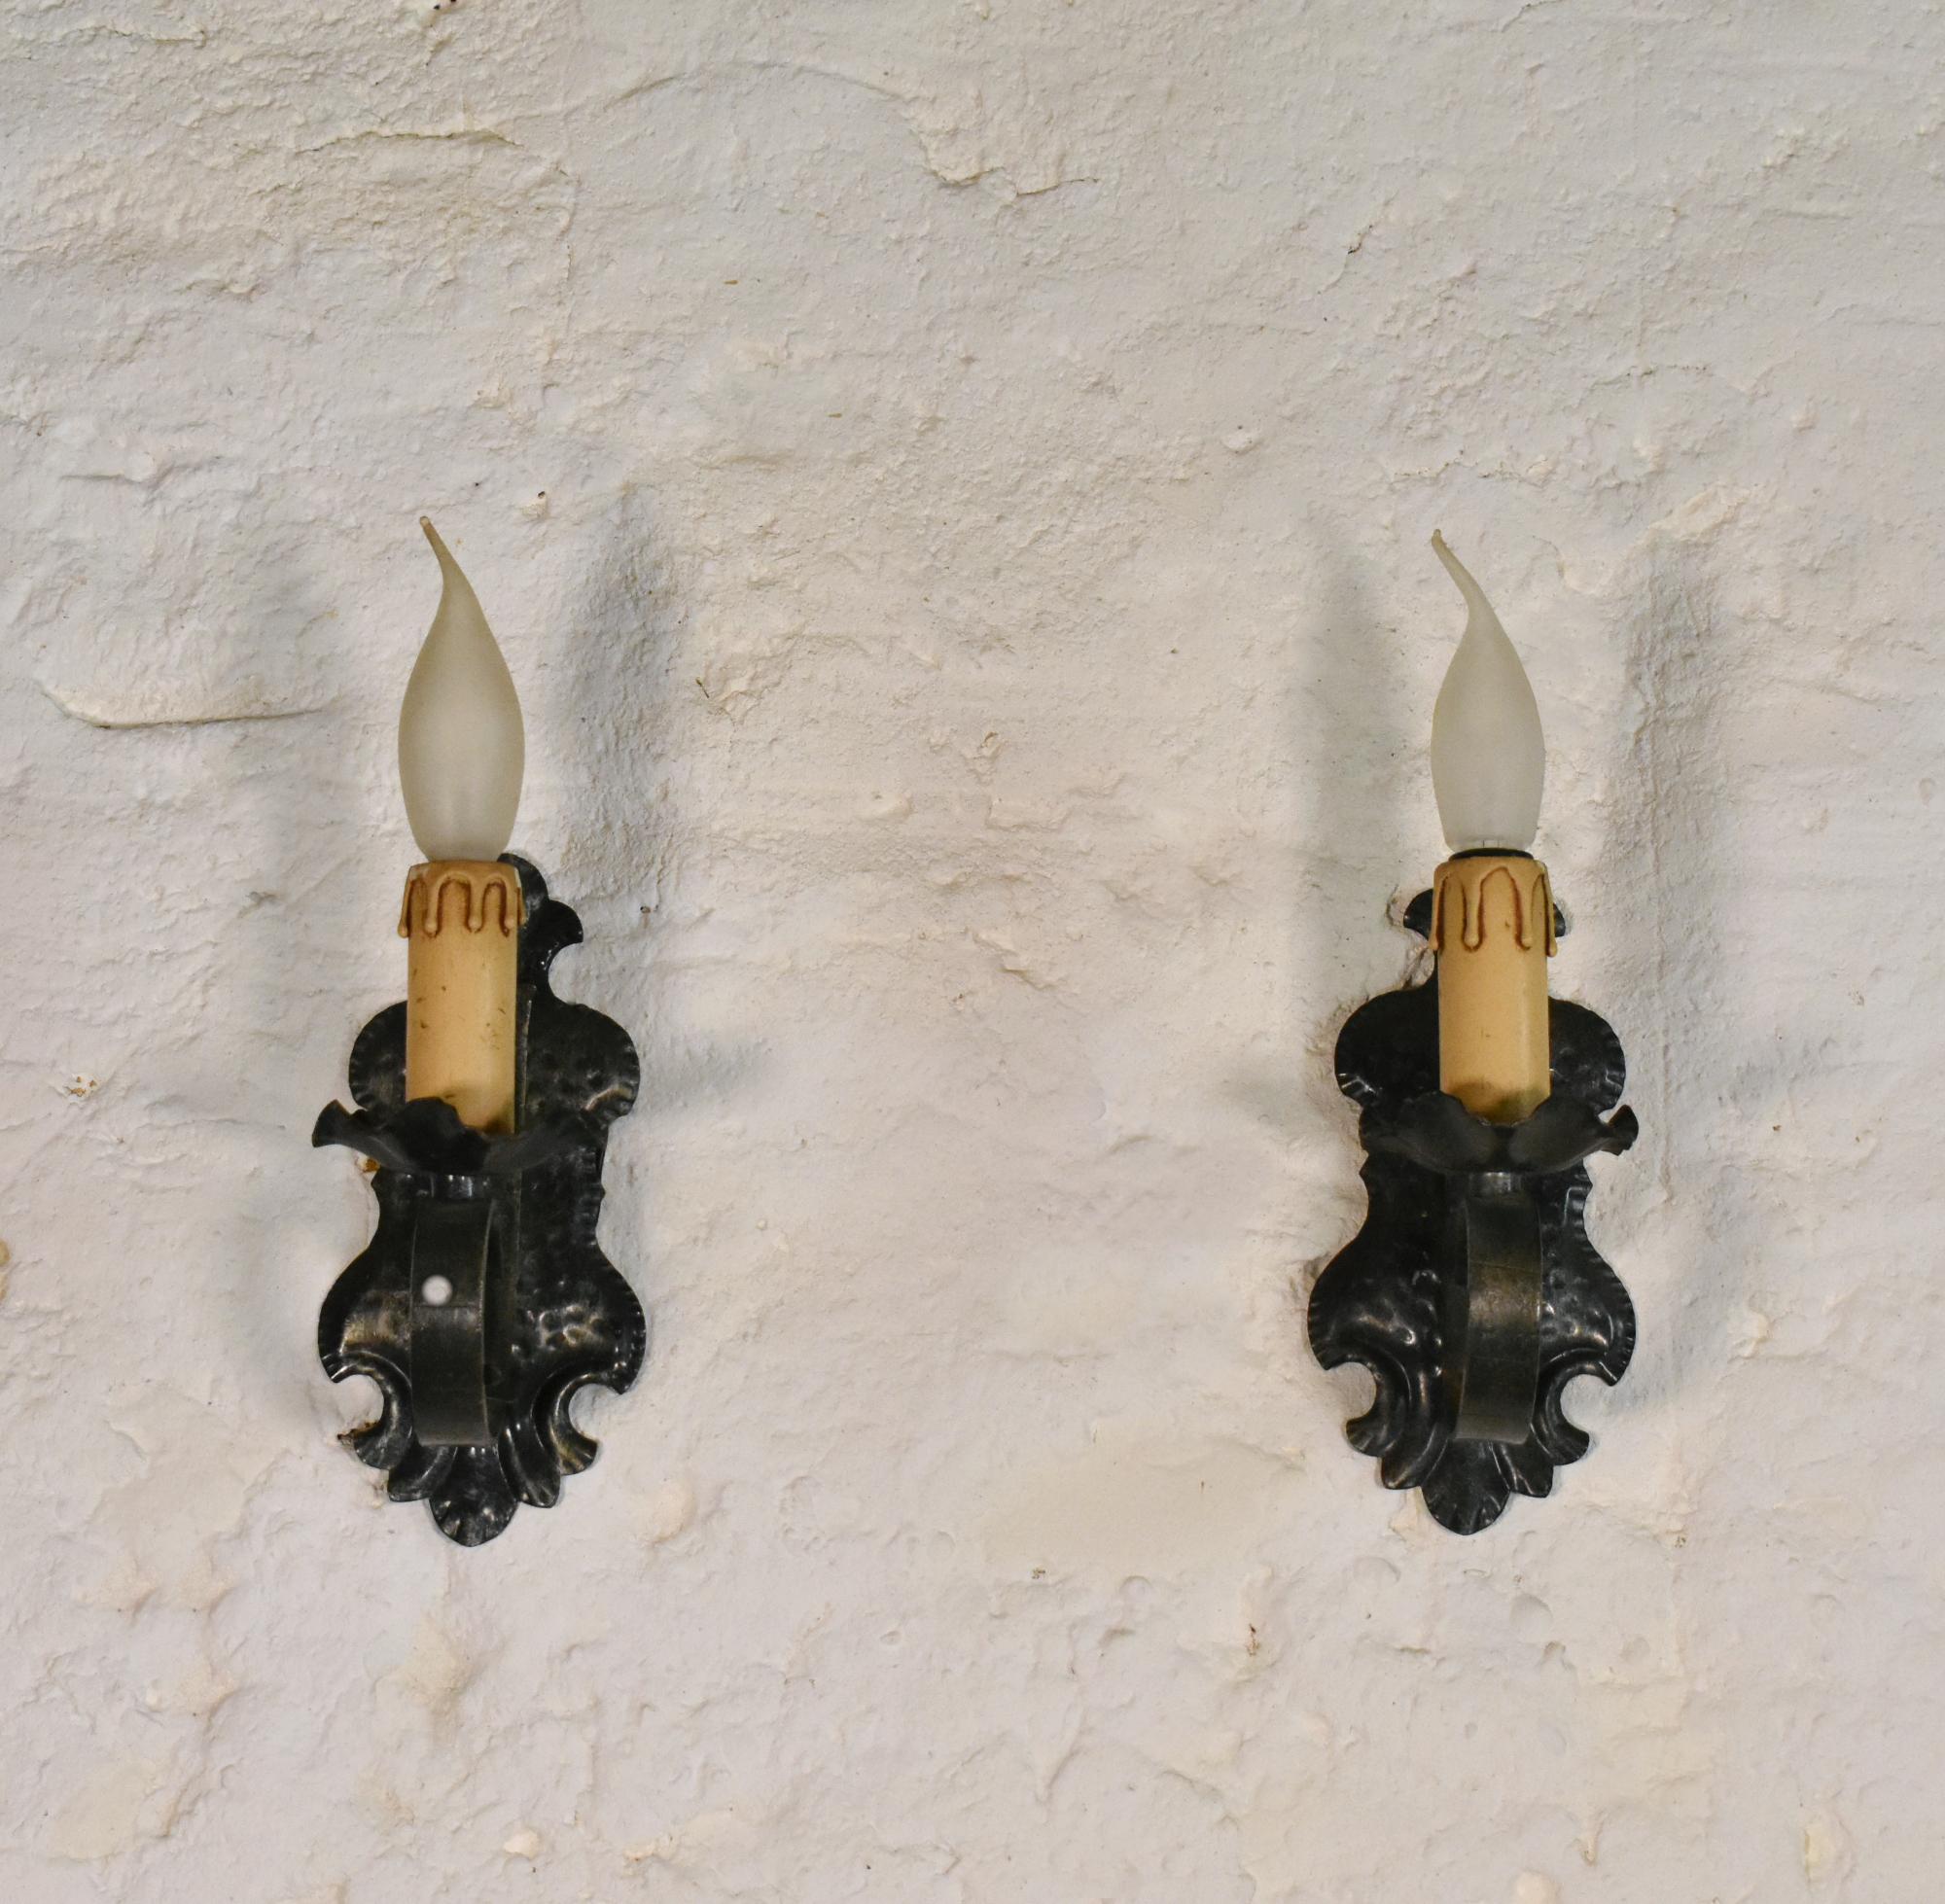 Pair of Mid Century Gothic Tole Wall Sconces
 
A pair of matching Gothic Tole Wall Sconces mounted on a pressed metal backdrop featuring floral decoration and lit by screw-in candle light bulbs.
 
The well-aged blackened patina adds to the character